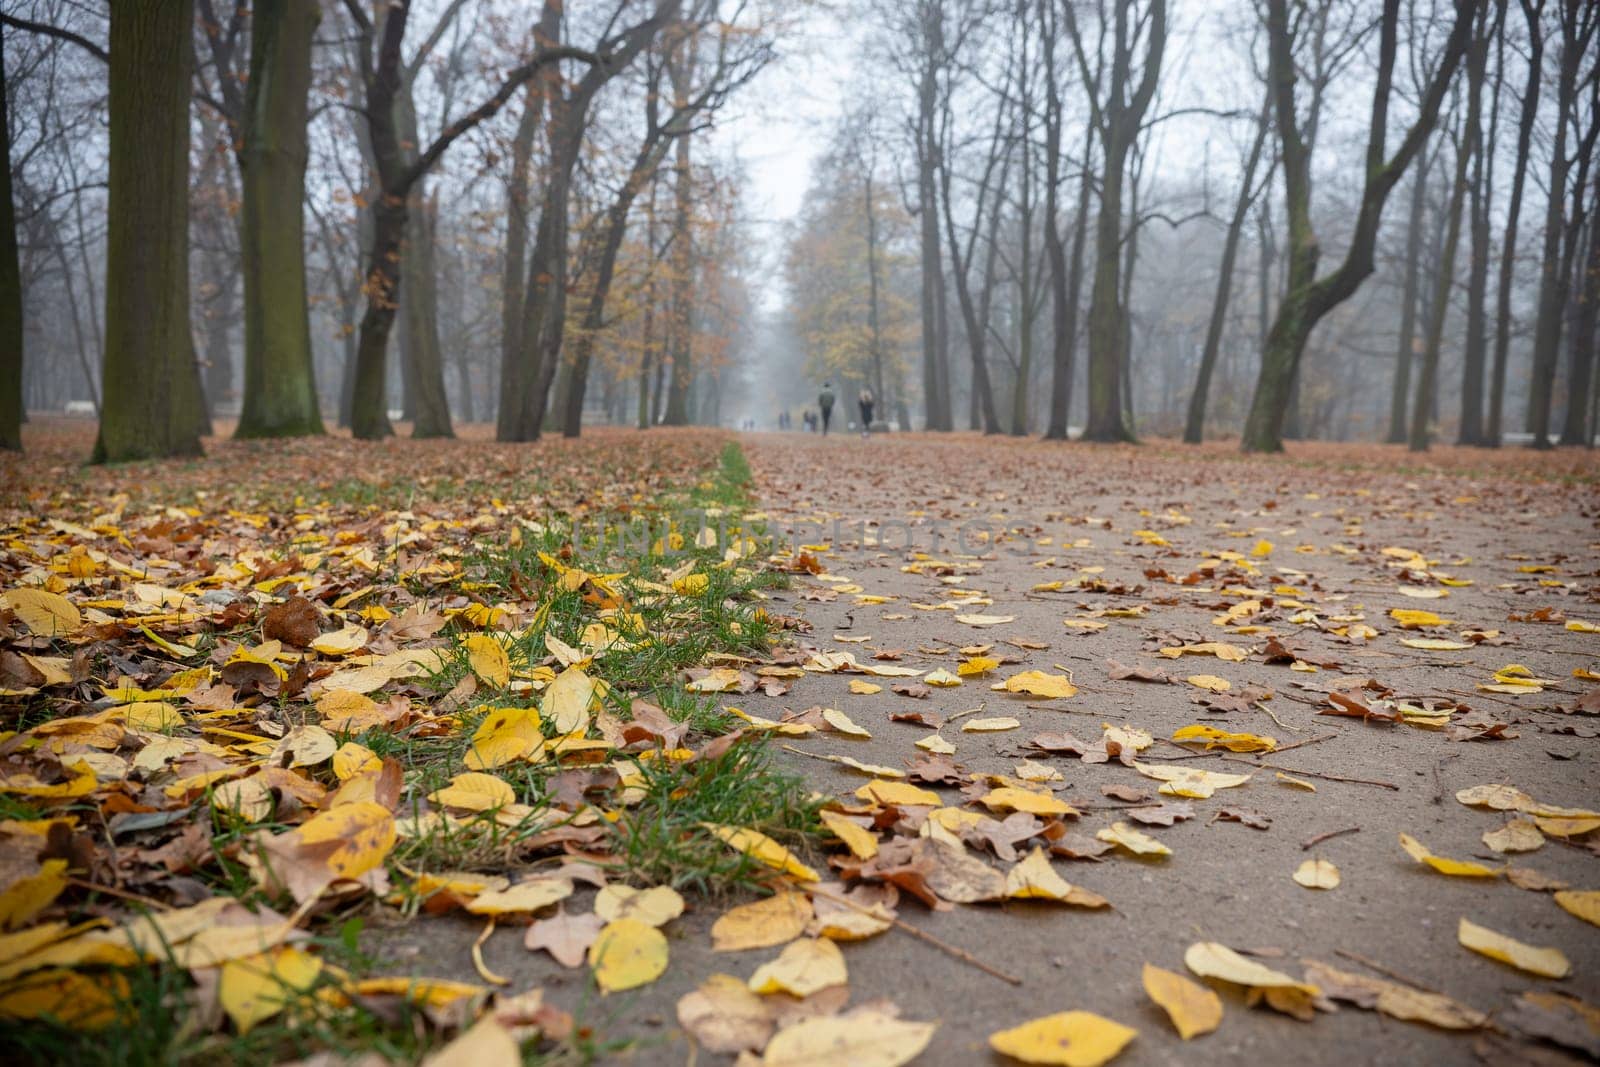 Fallen leaves on a park pathway - autumn background by Studia72